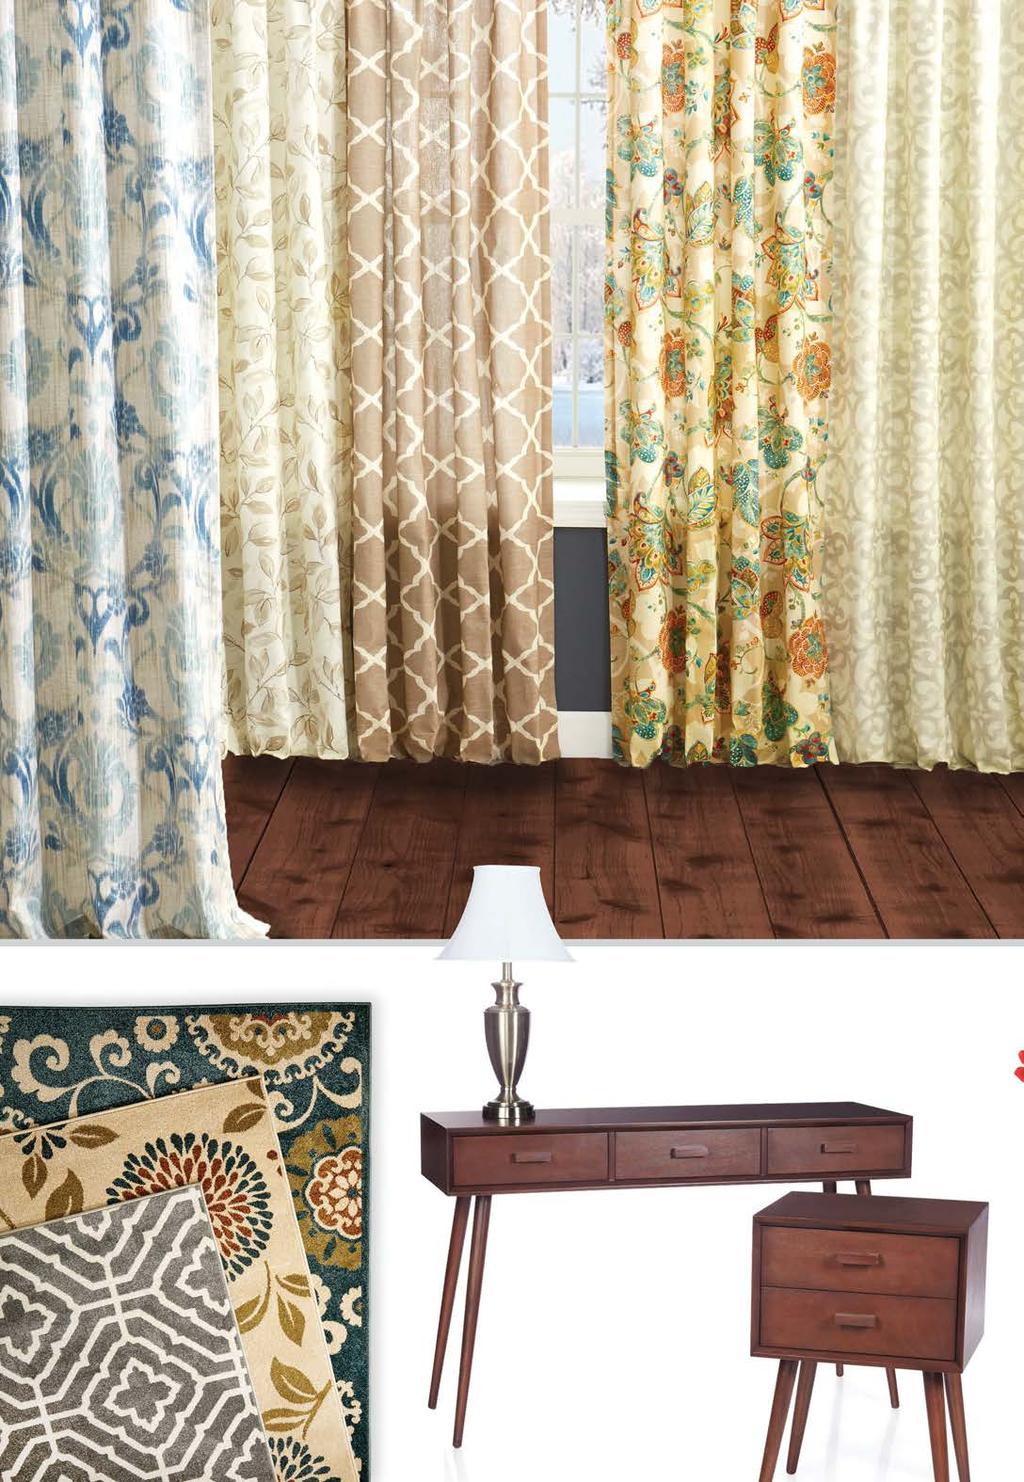 Perfectly patterned WINDOW DRESSINGS! 16 99 PAIR Printed Panel Pairs Variety of styles. 40 w (80" for the pair) x 63" and 84"l. Also available: Scalloped Valances $7.99 ea.